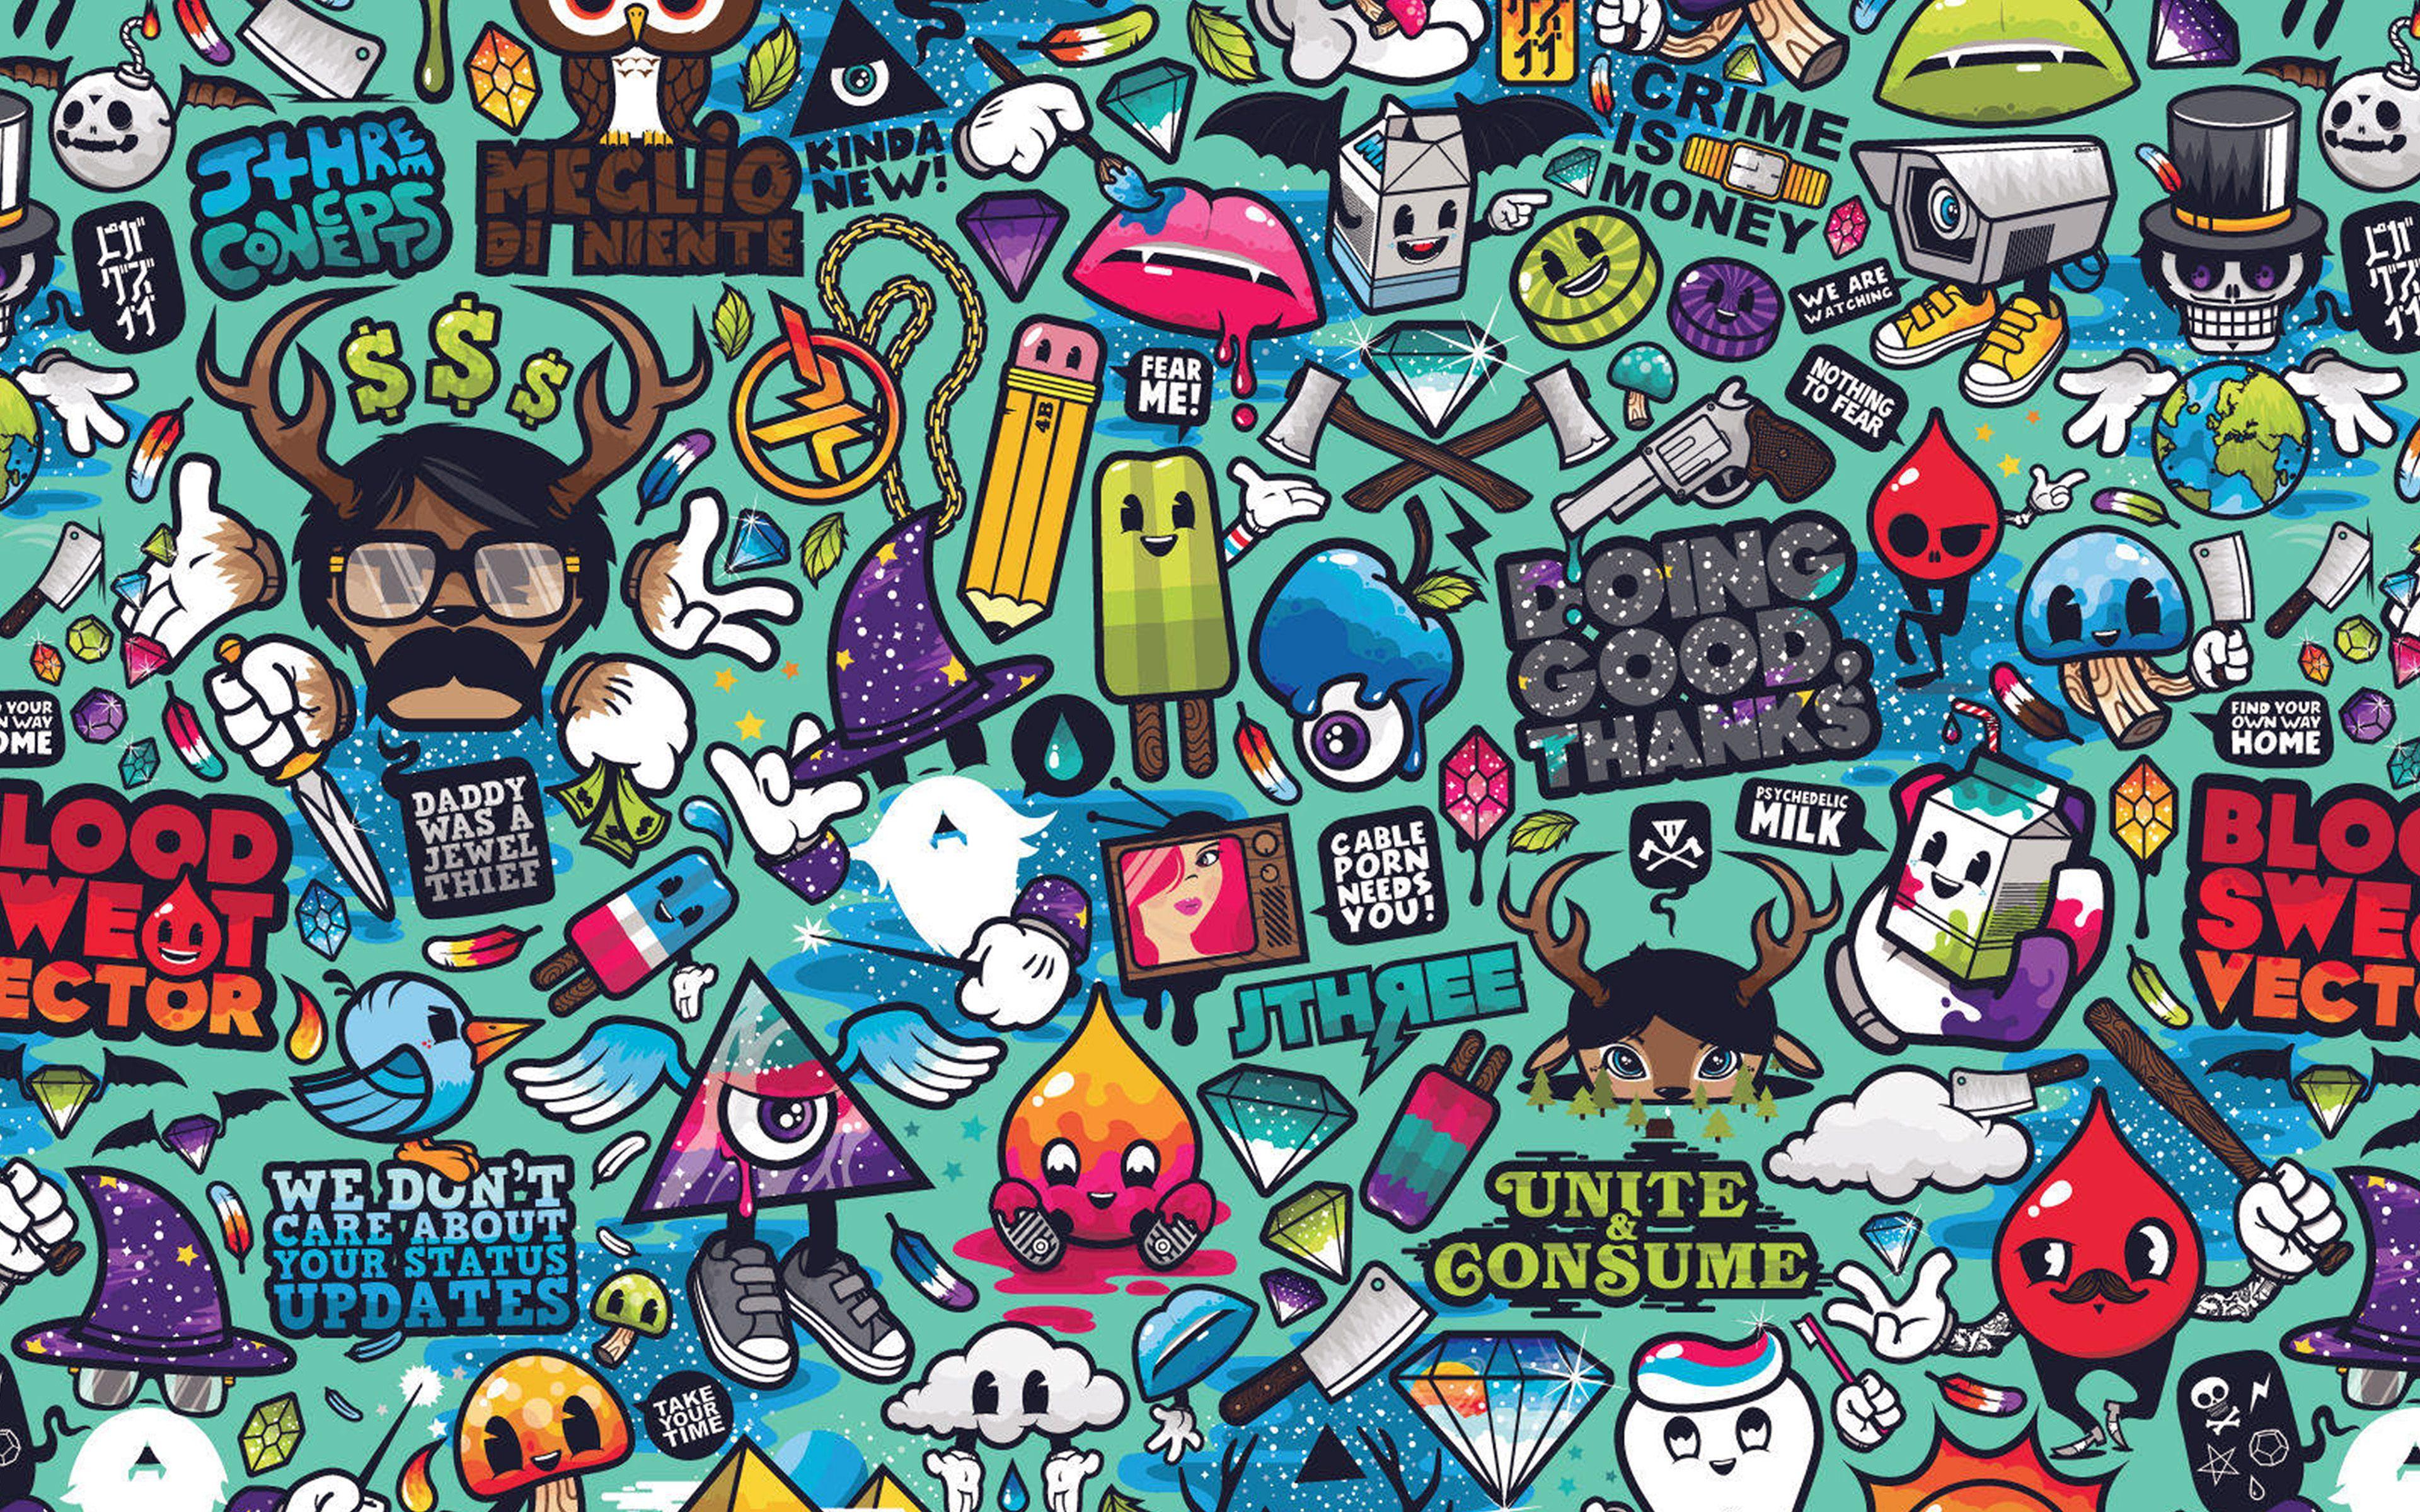 Graffiti Laptop Wallpapers Top Free Graffiti Laptop Backgrounds Wallpaperaccess Find the best graffiti wallpaper on wallpapertag. graffiti laptop wallpapers top free